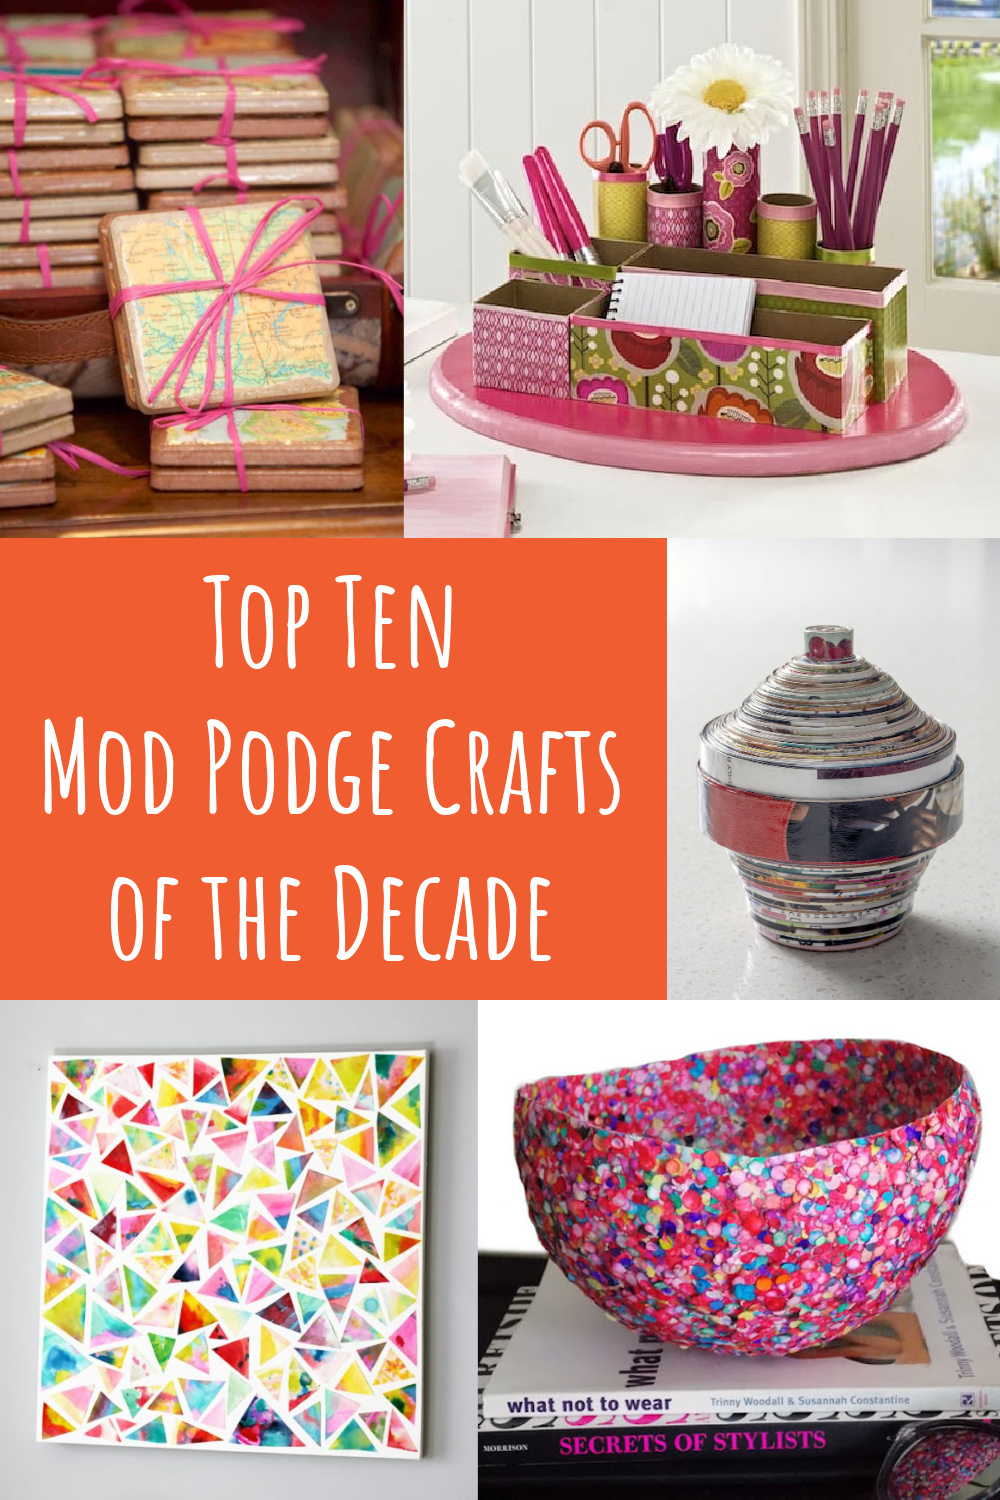 Top 10 Mod Podge Crafts of the Decade